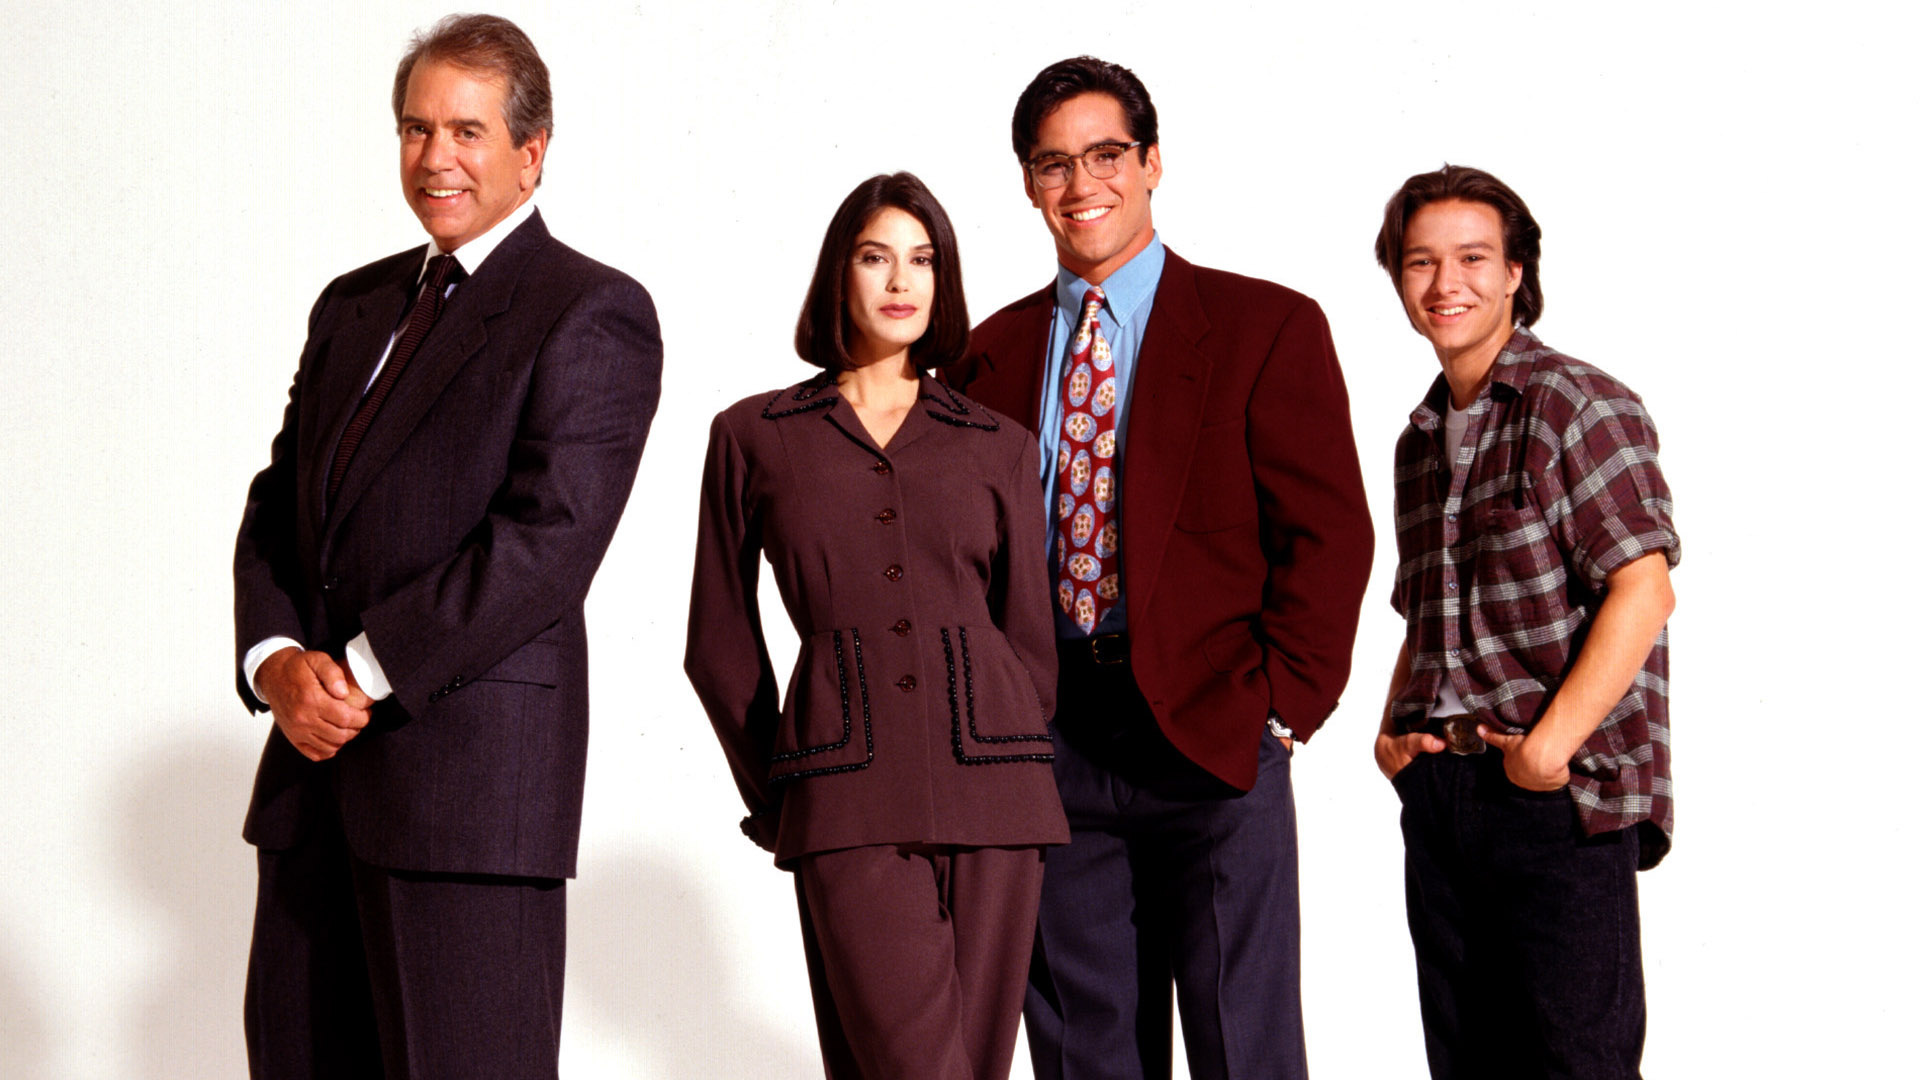 Lois and Clark: The New Adventures of Superman: TV show starring Dean Cain, Teri Hatcher, Justin Whalin, and Lane Smith. 1920x1080 Full HD Background.